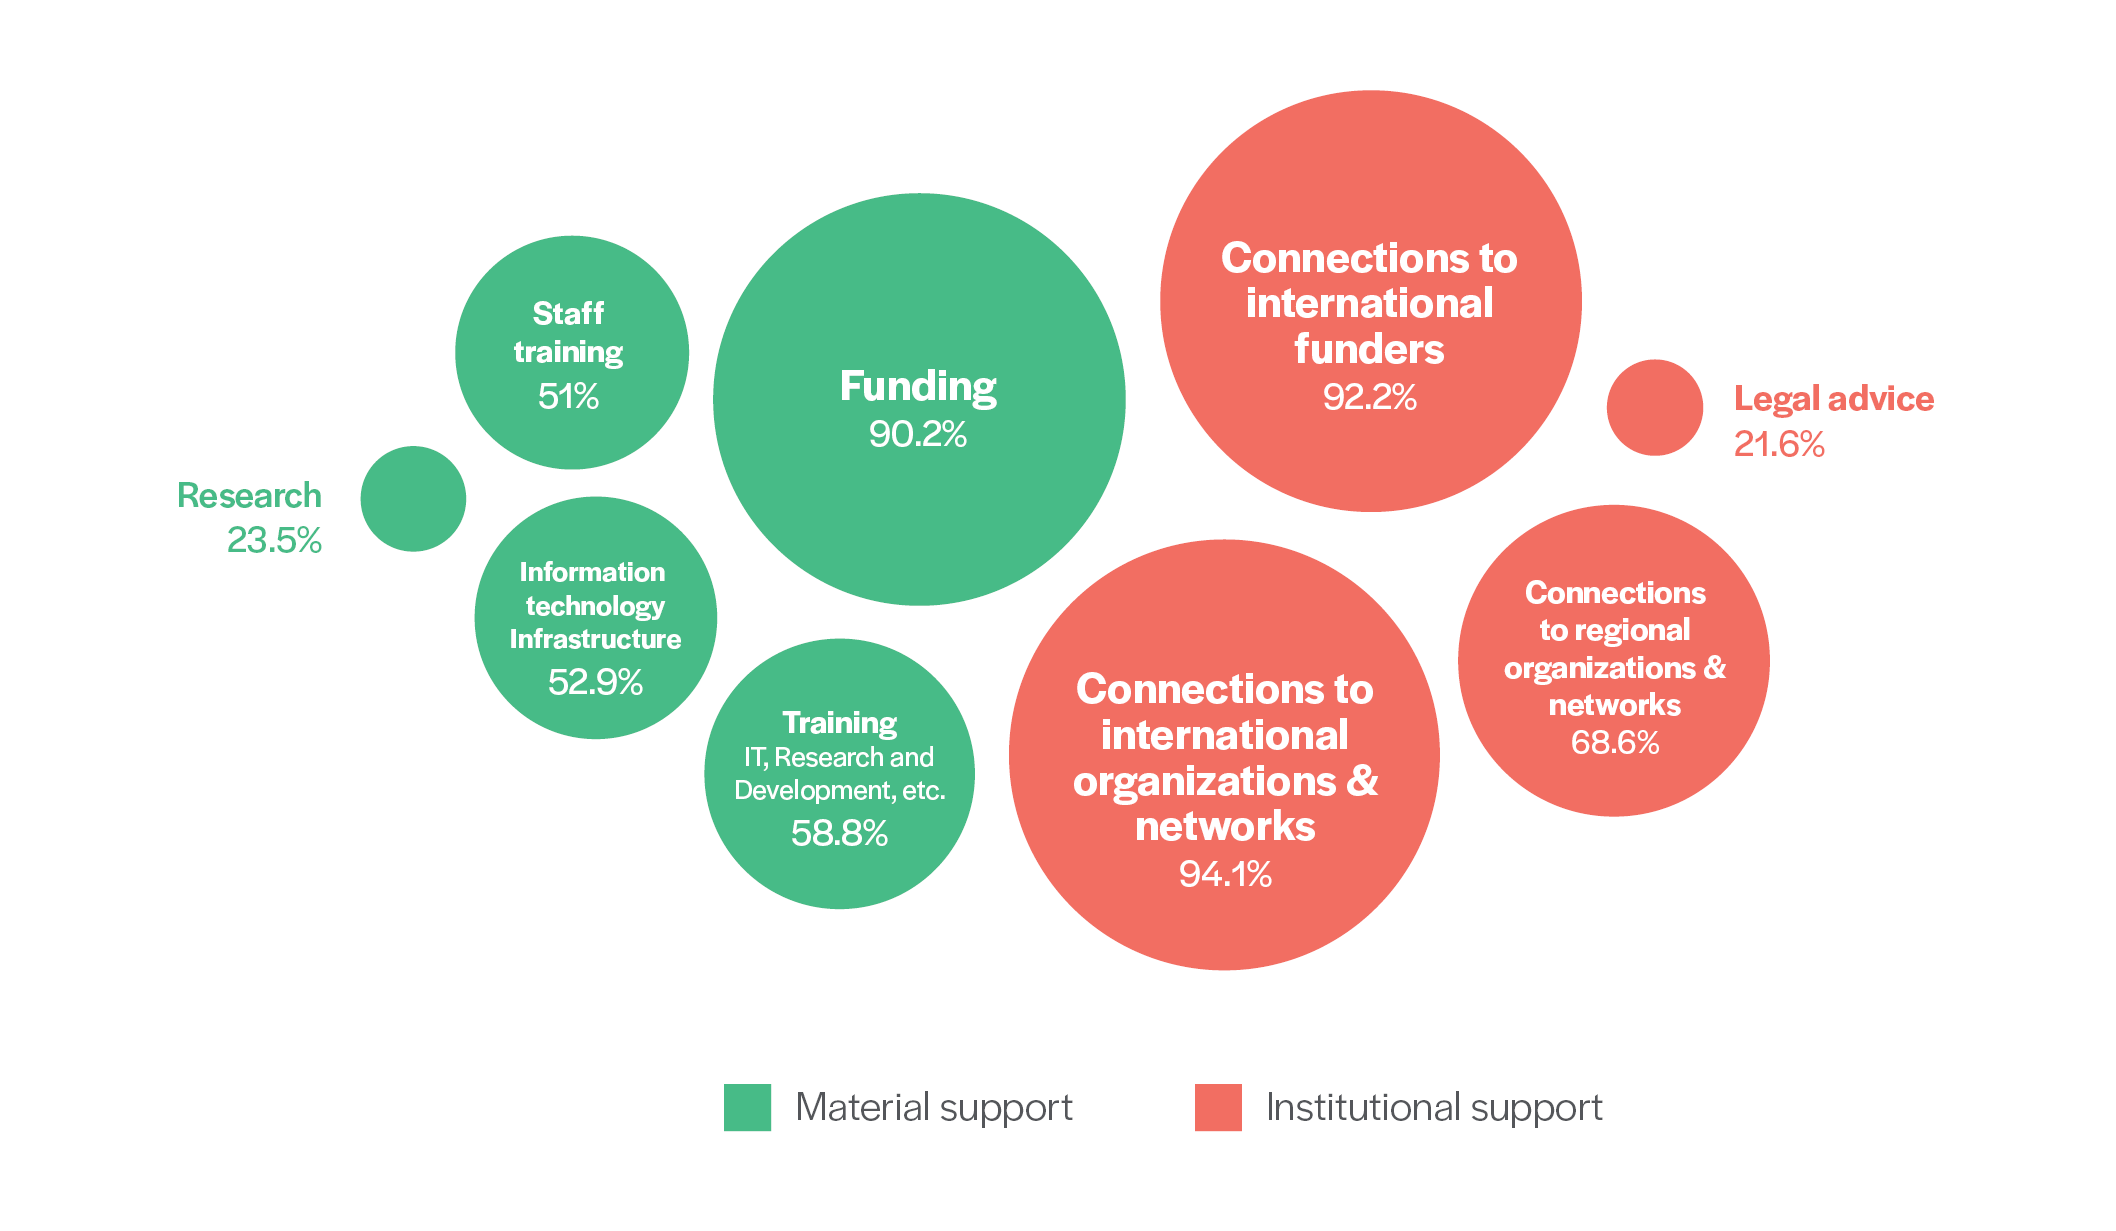 Circle-density graph depicting institutional and material support needed by organizations